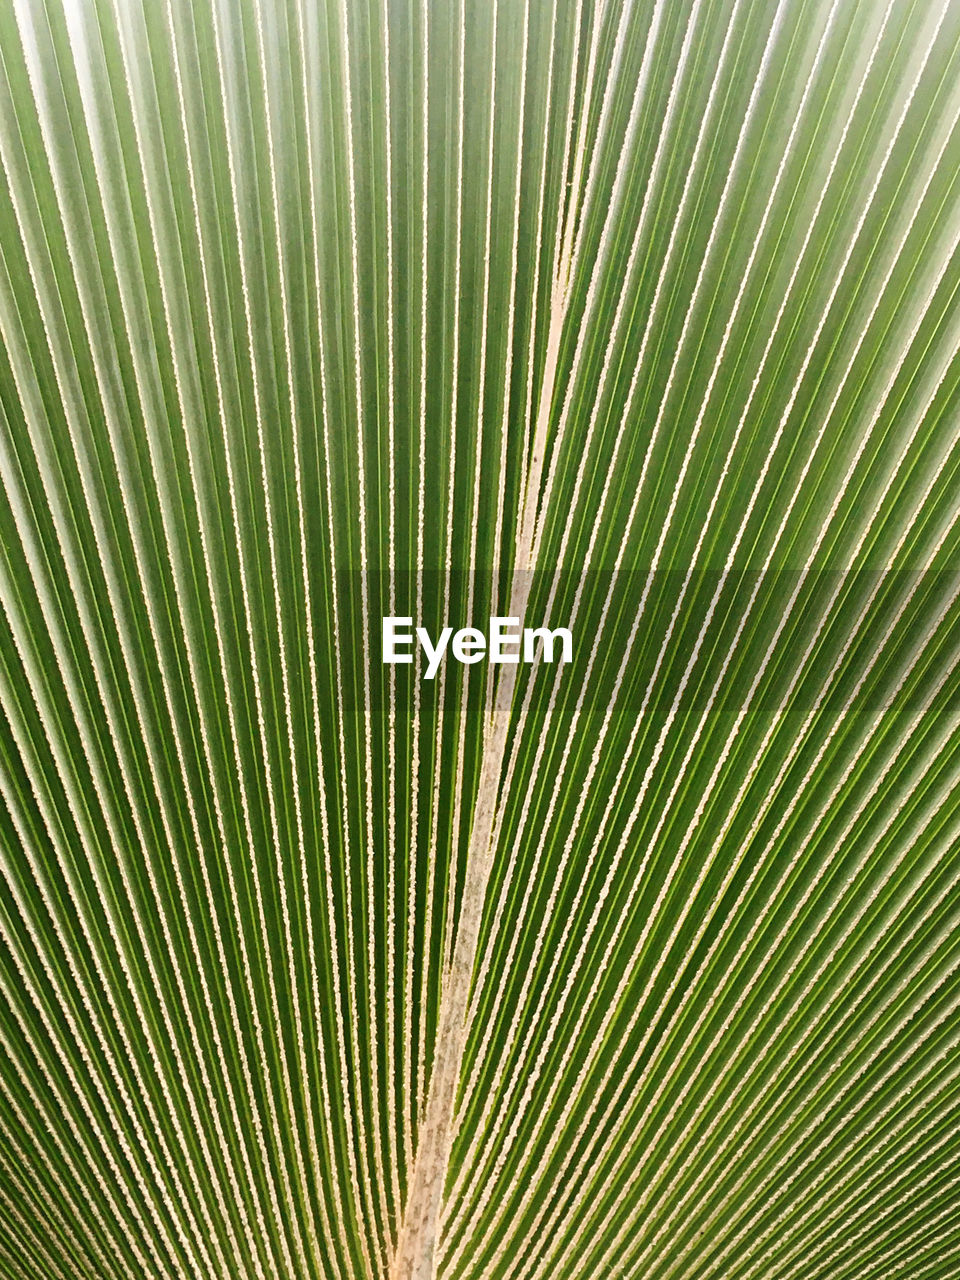 leaf, backgrounds, plant part, pattern, green, full frame, palm leaf, palm tree, no people, close-up, plant, nature, tropical climate, textured, growth, beauty in nature, tree, frond, day, striped, line, outdoors, flower, circle, botany